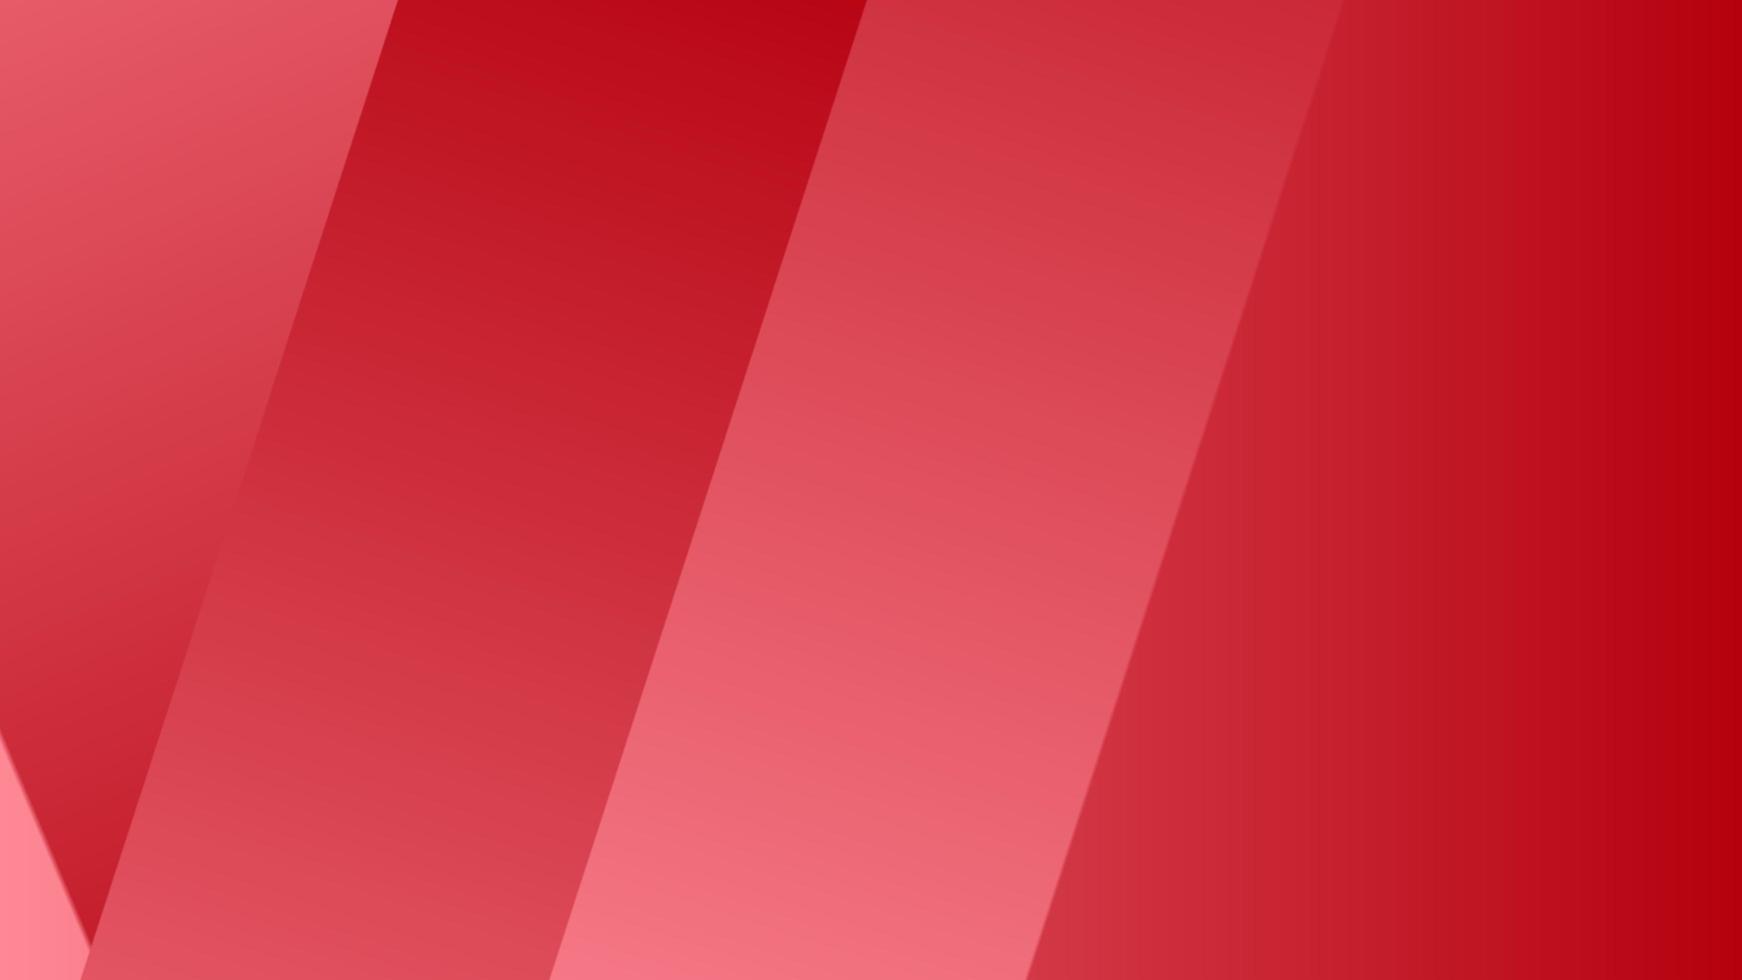 Modern simple abstract with square geometric background in the blend of dark and light red gradient. Elegant background in dark and light red colors can use for wallpaper, presentation, backdrop, etc. photo